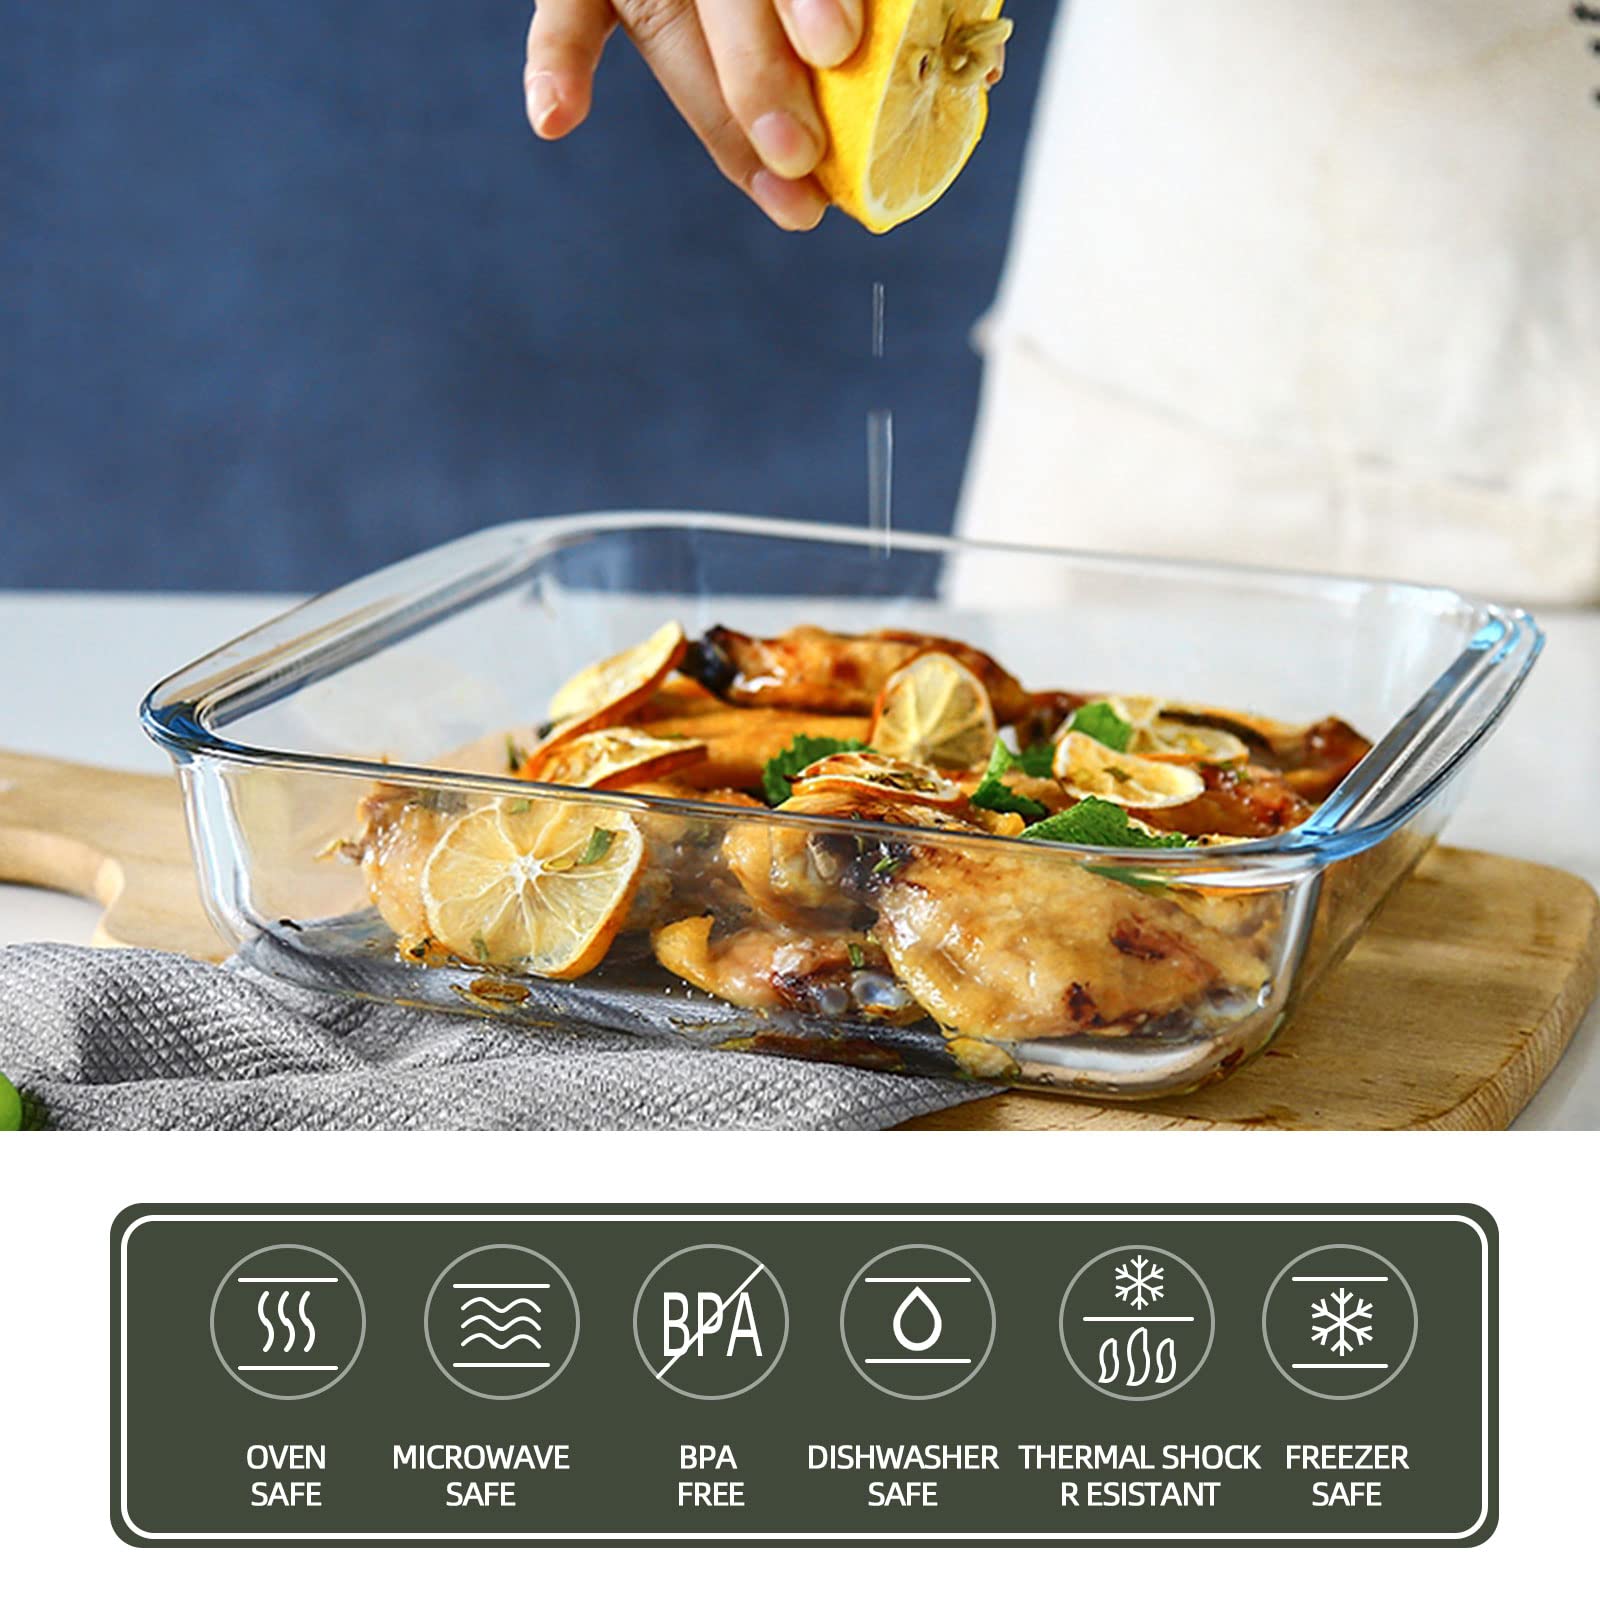 KOMUEE Rectangular Glass Baking Dish with Lids Set & Round Glass Food Storage Containers With Lids Set,Glass Bakeware Set with Lids for Lasagna, Leftovers, Cooking, Kitchen, Fridge-to-Oven,Gray